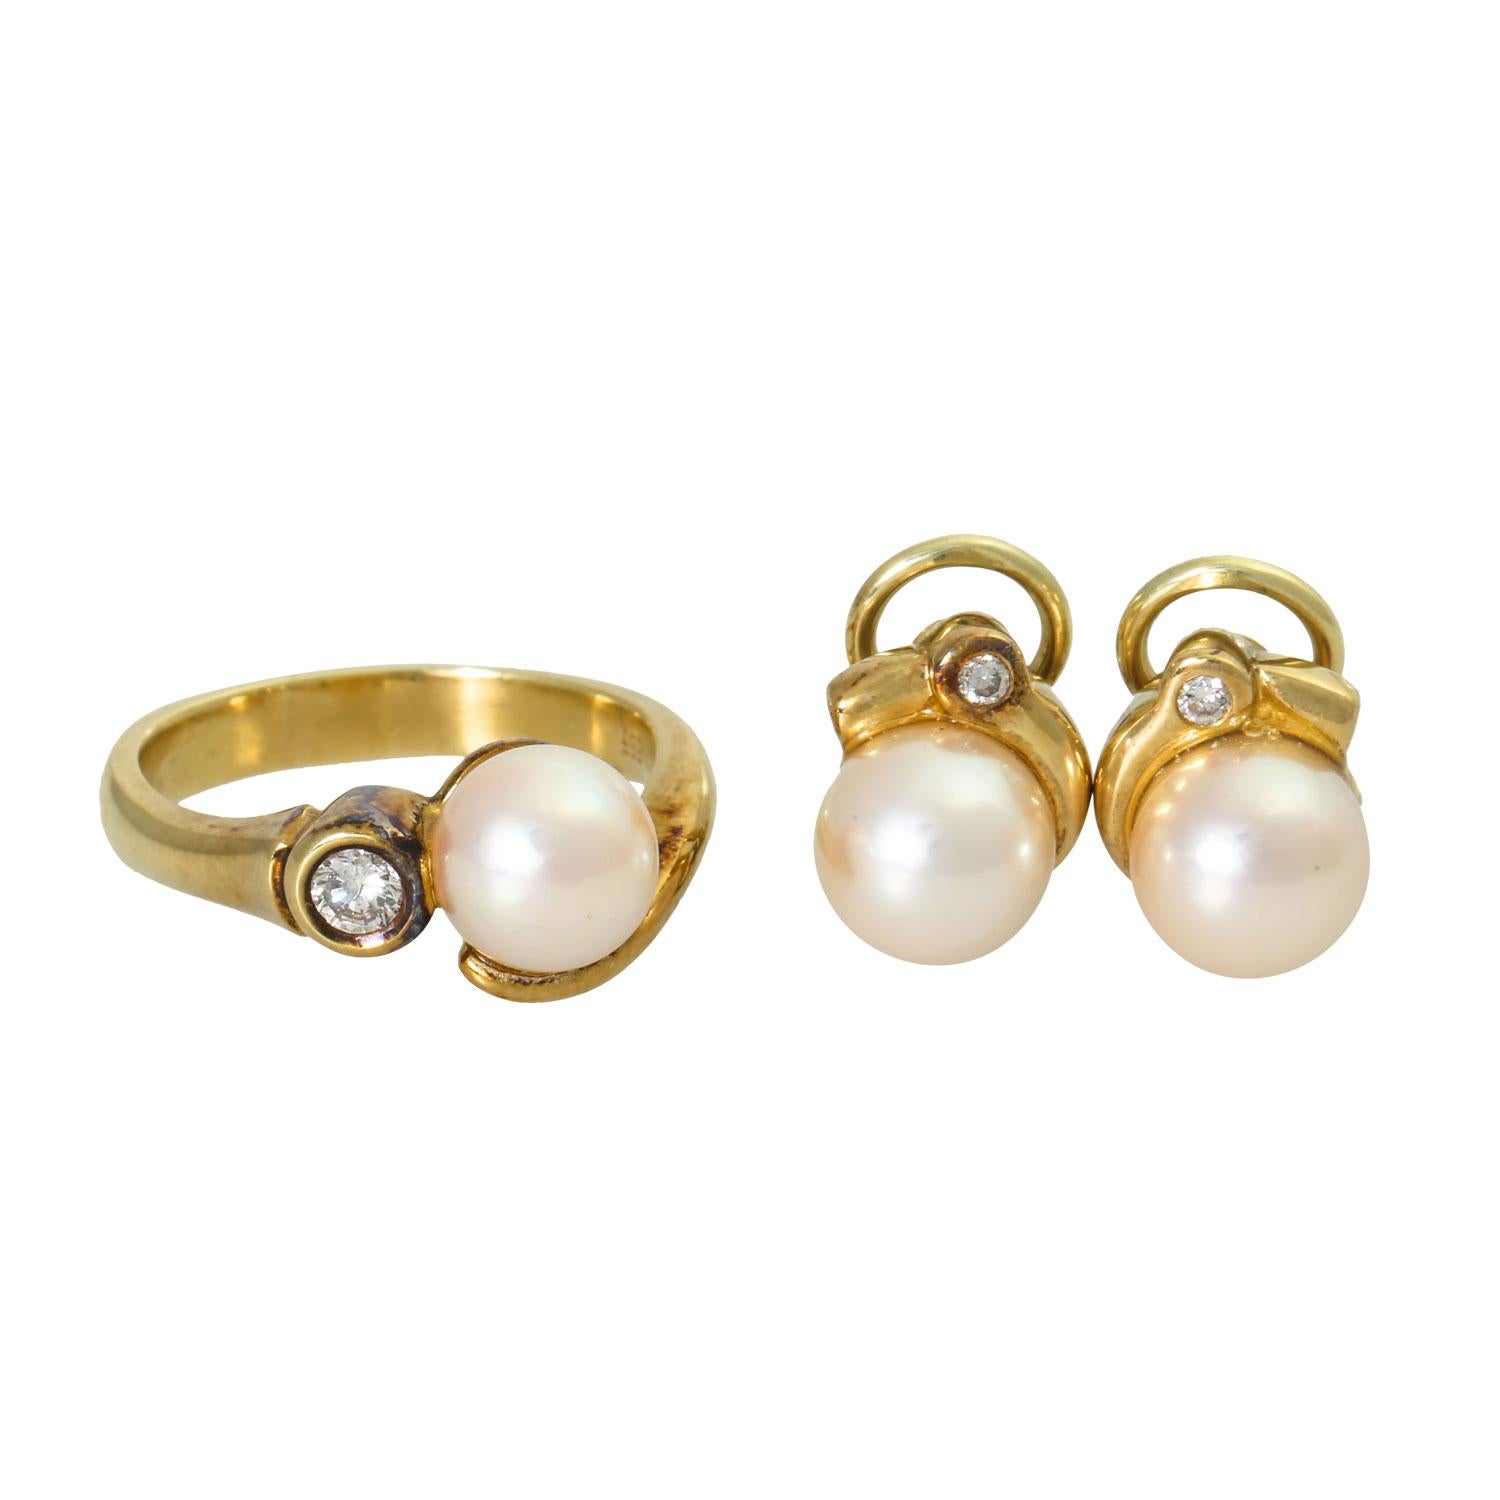 approx. WHITE (H)/P1, Akoya cultured pearls 8.5 mm, GG 14K, 13.7 g, RW: 59, late 20th century, slight signs of wear.

 Jewelery set ring and earclips with Akoya cultured pearls 8.5 mm and brilliant-cut diamonds totaling approx. 0.26 ct, approx.